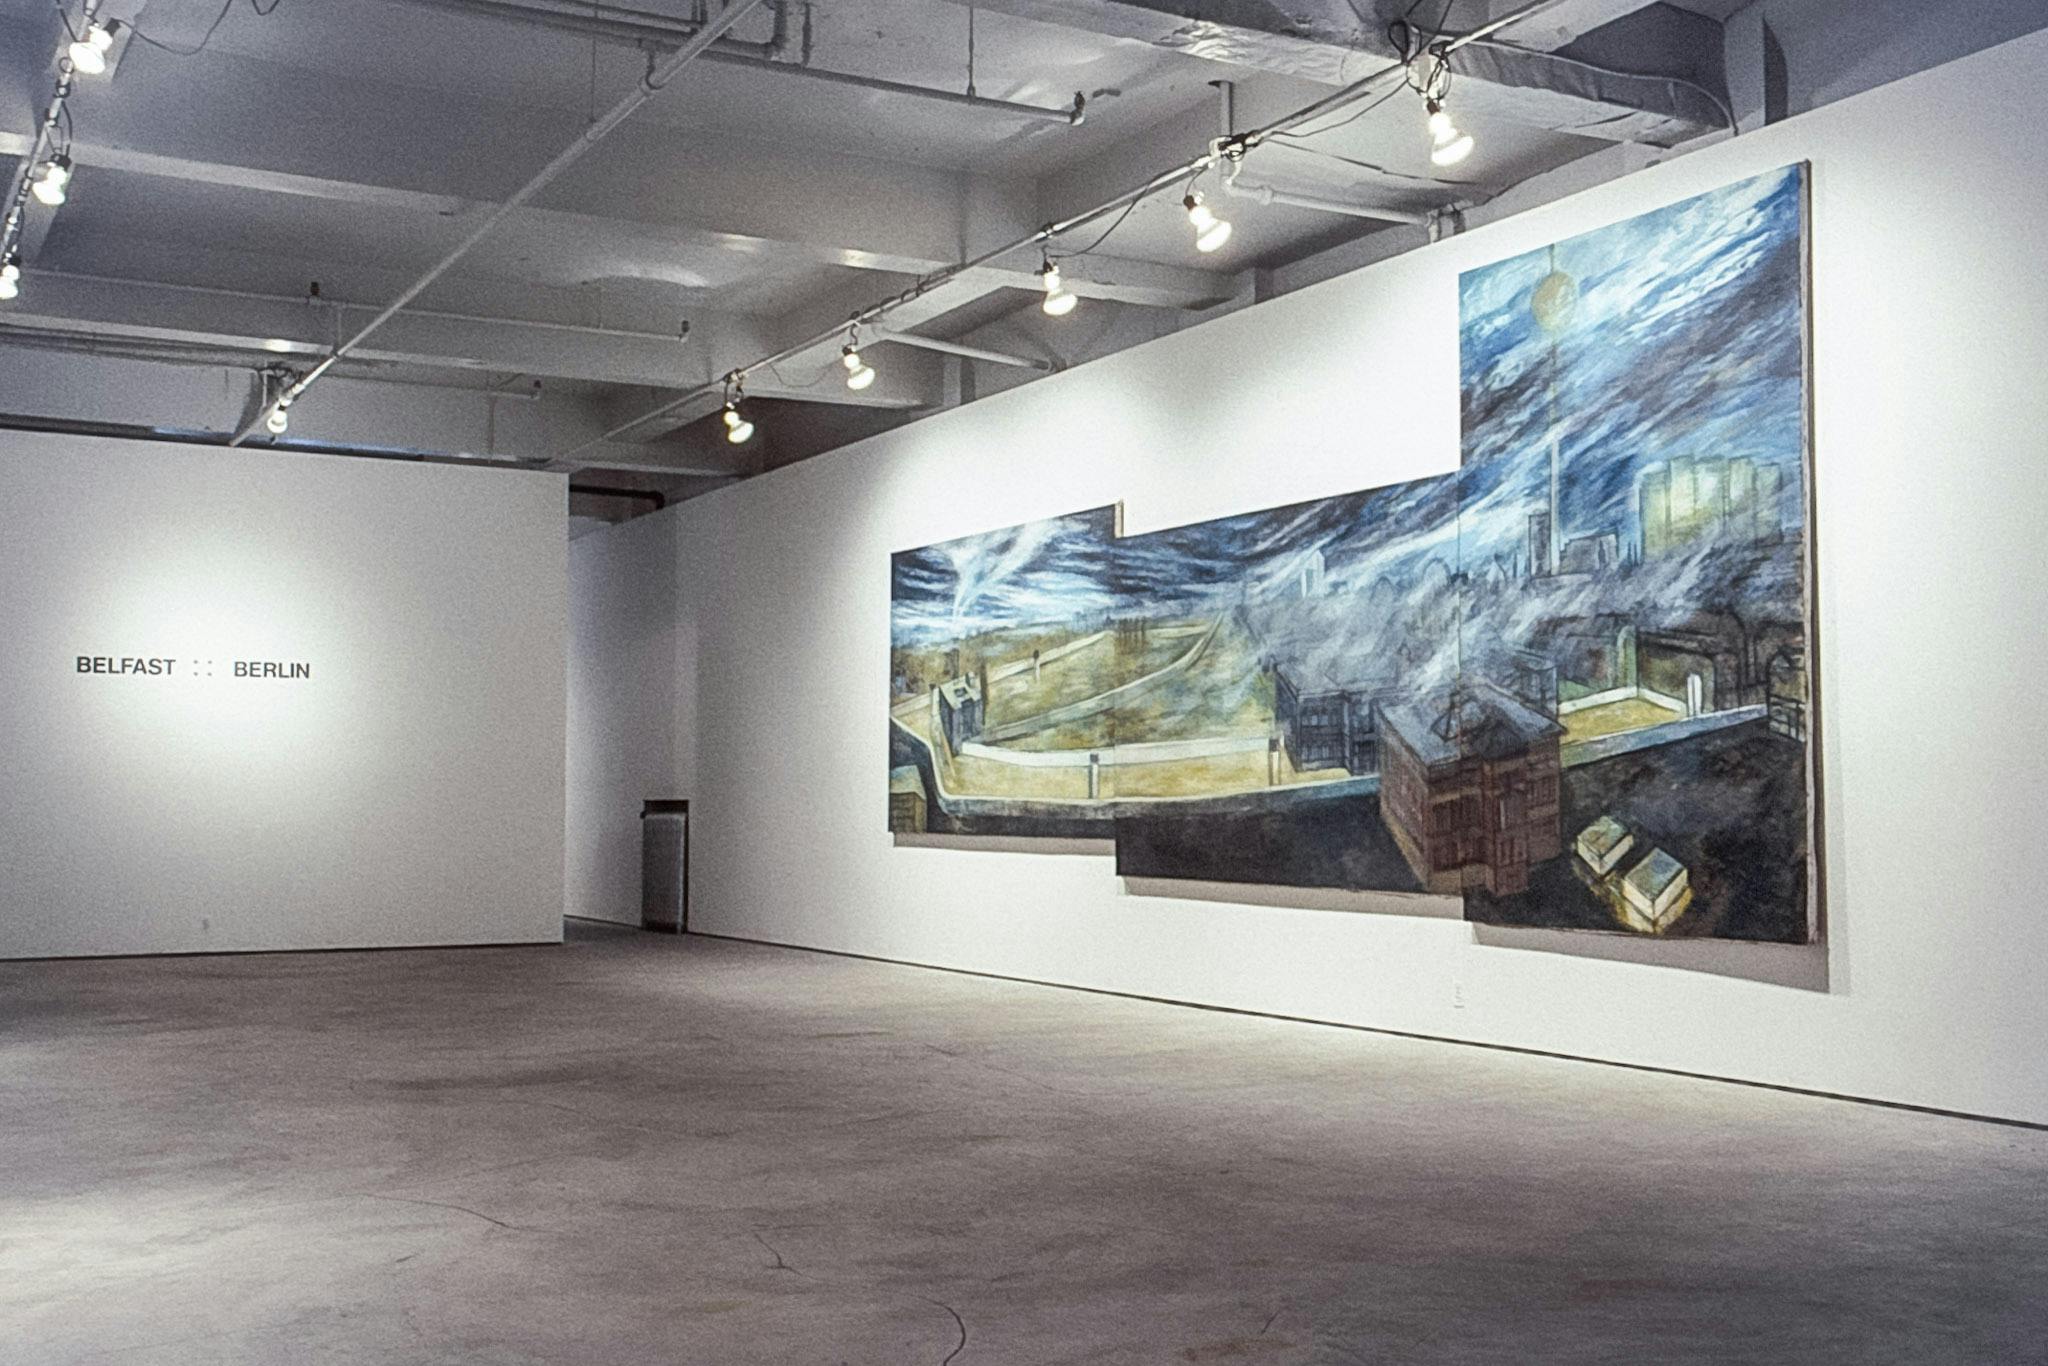 A gallery space showing a large blue and yellow painting made up of 3 canvases mounted on a wall. On another wall, there is large black text that reads "Belfast : : Berlin."